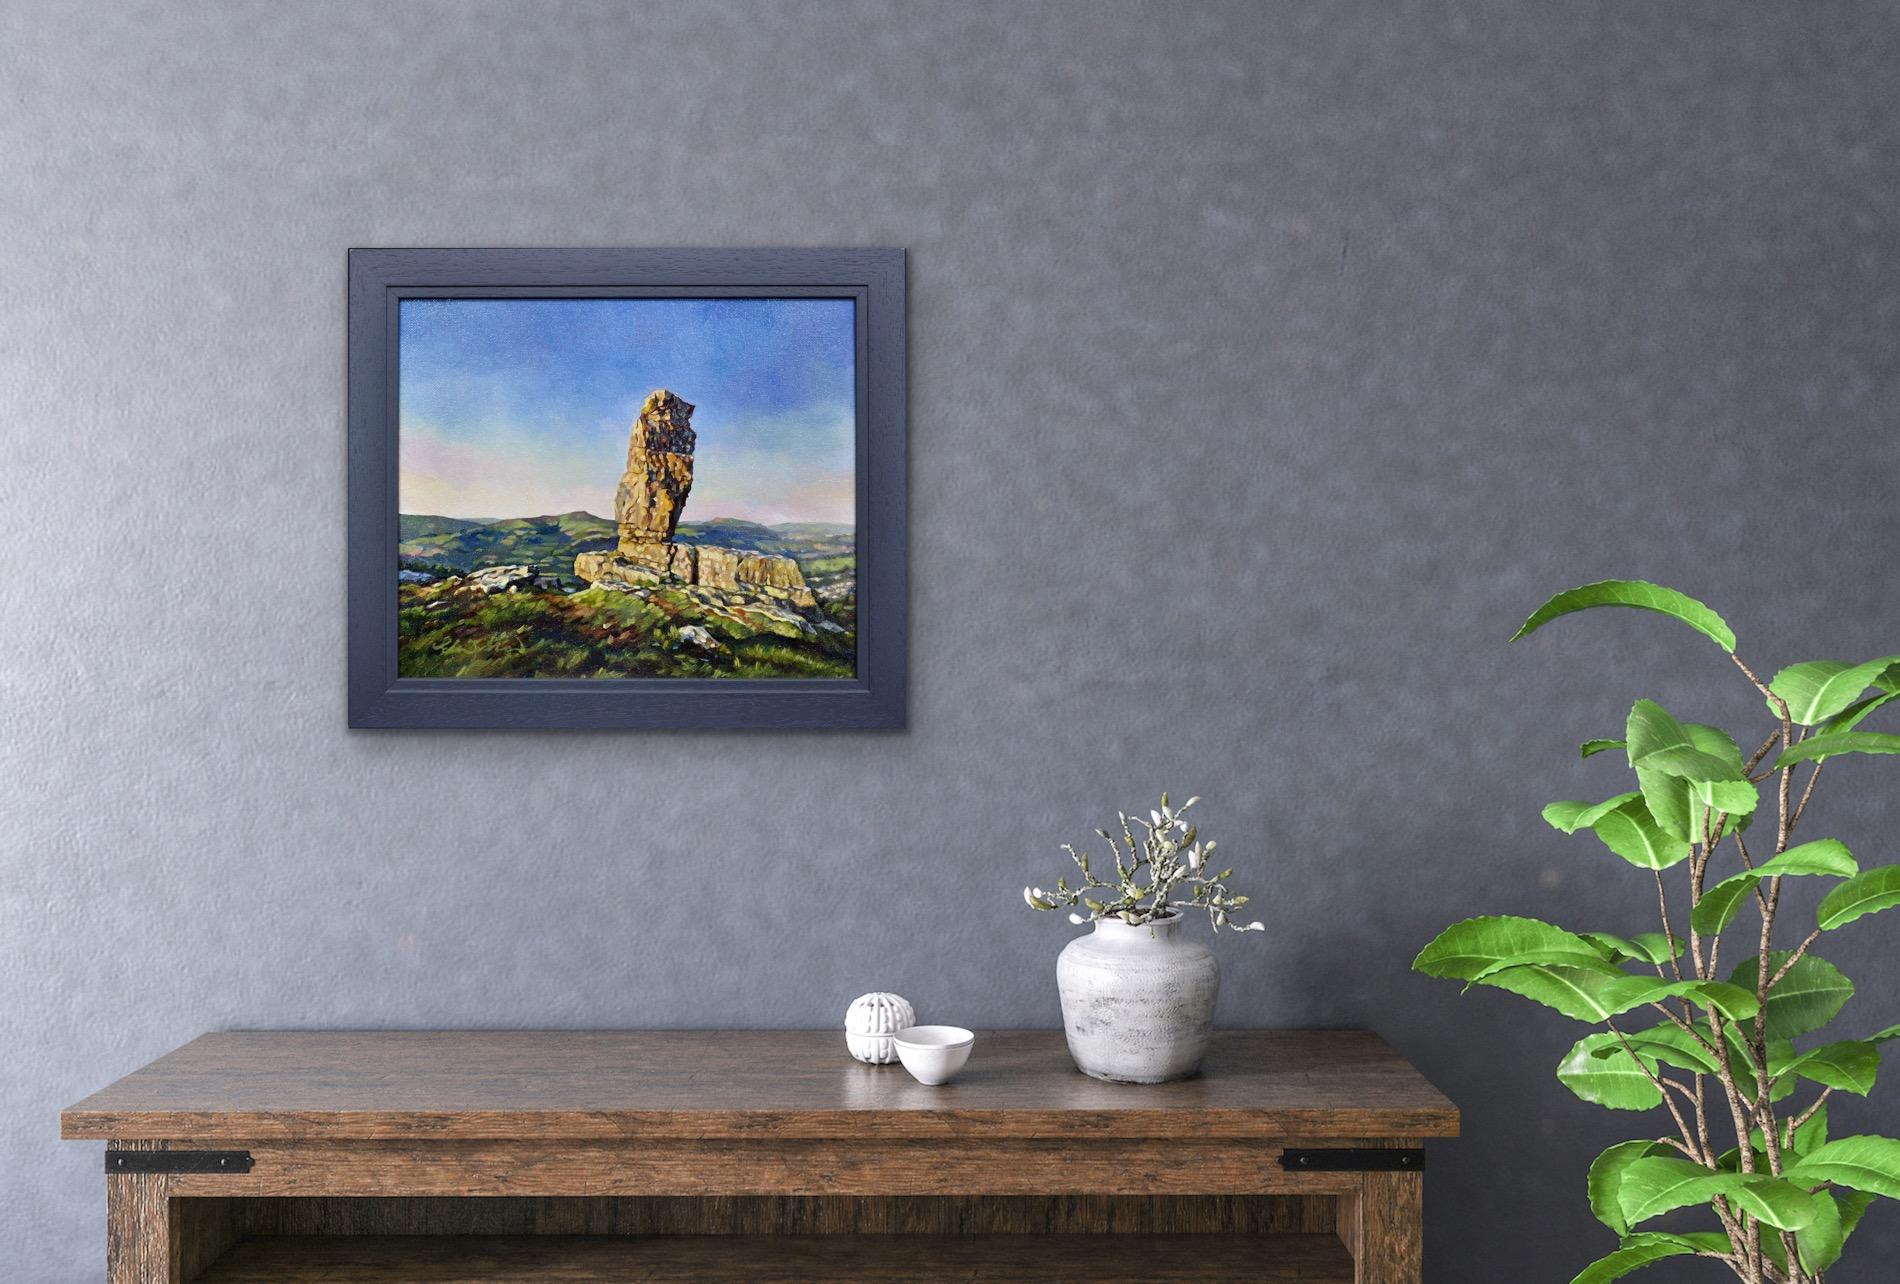 Y Bugail Unig (The Lonely Shepherd), Llangattock, Brecon Beacons. Welsh Folklore For Sale 9